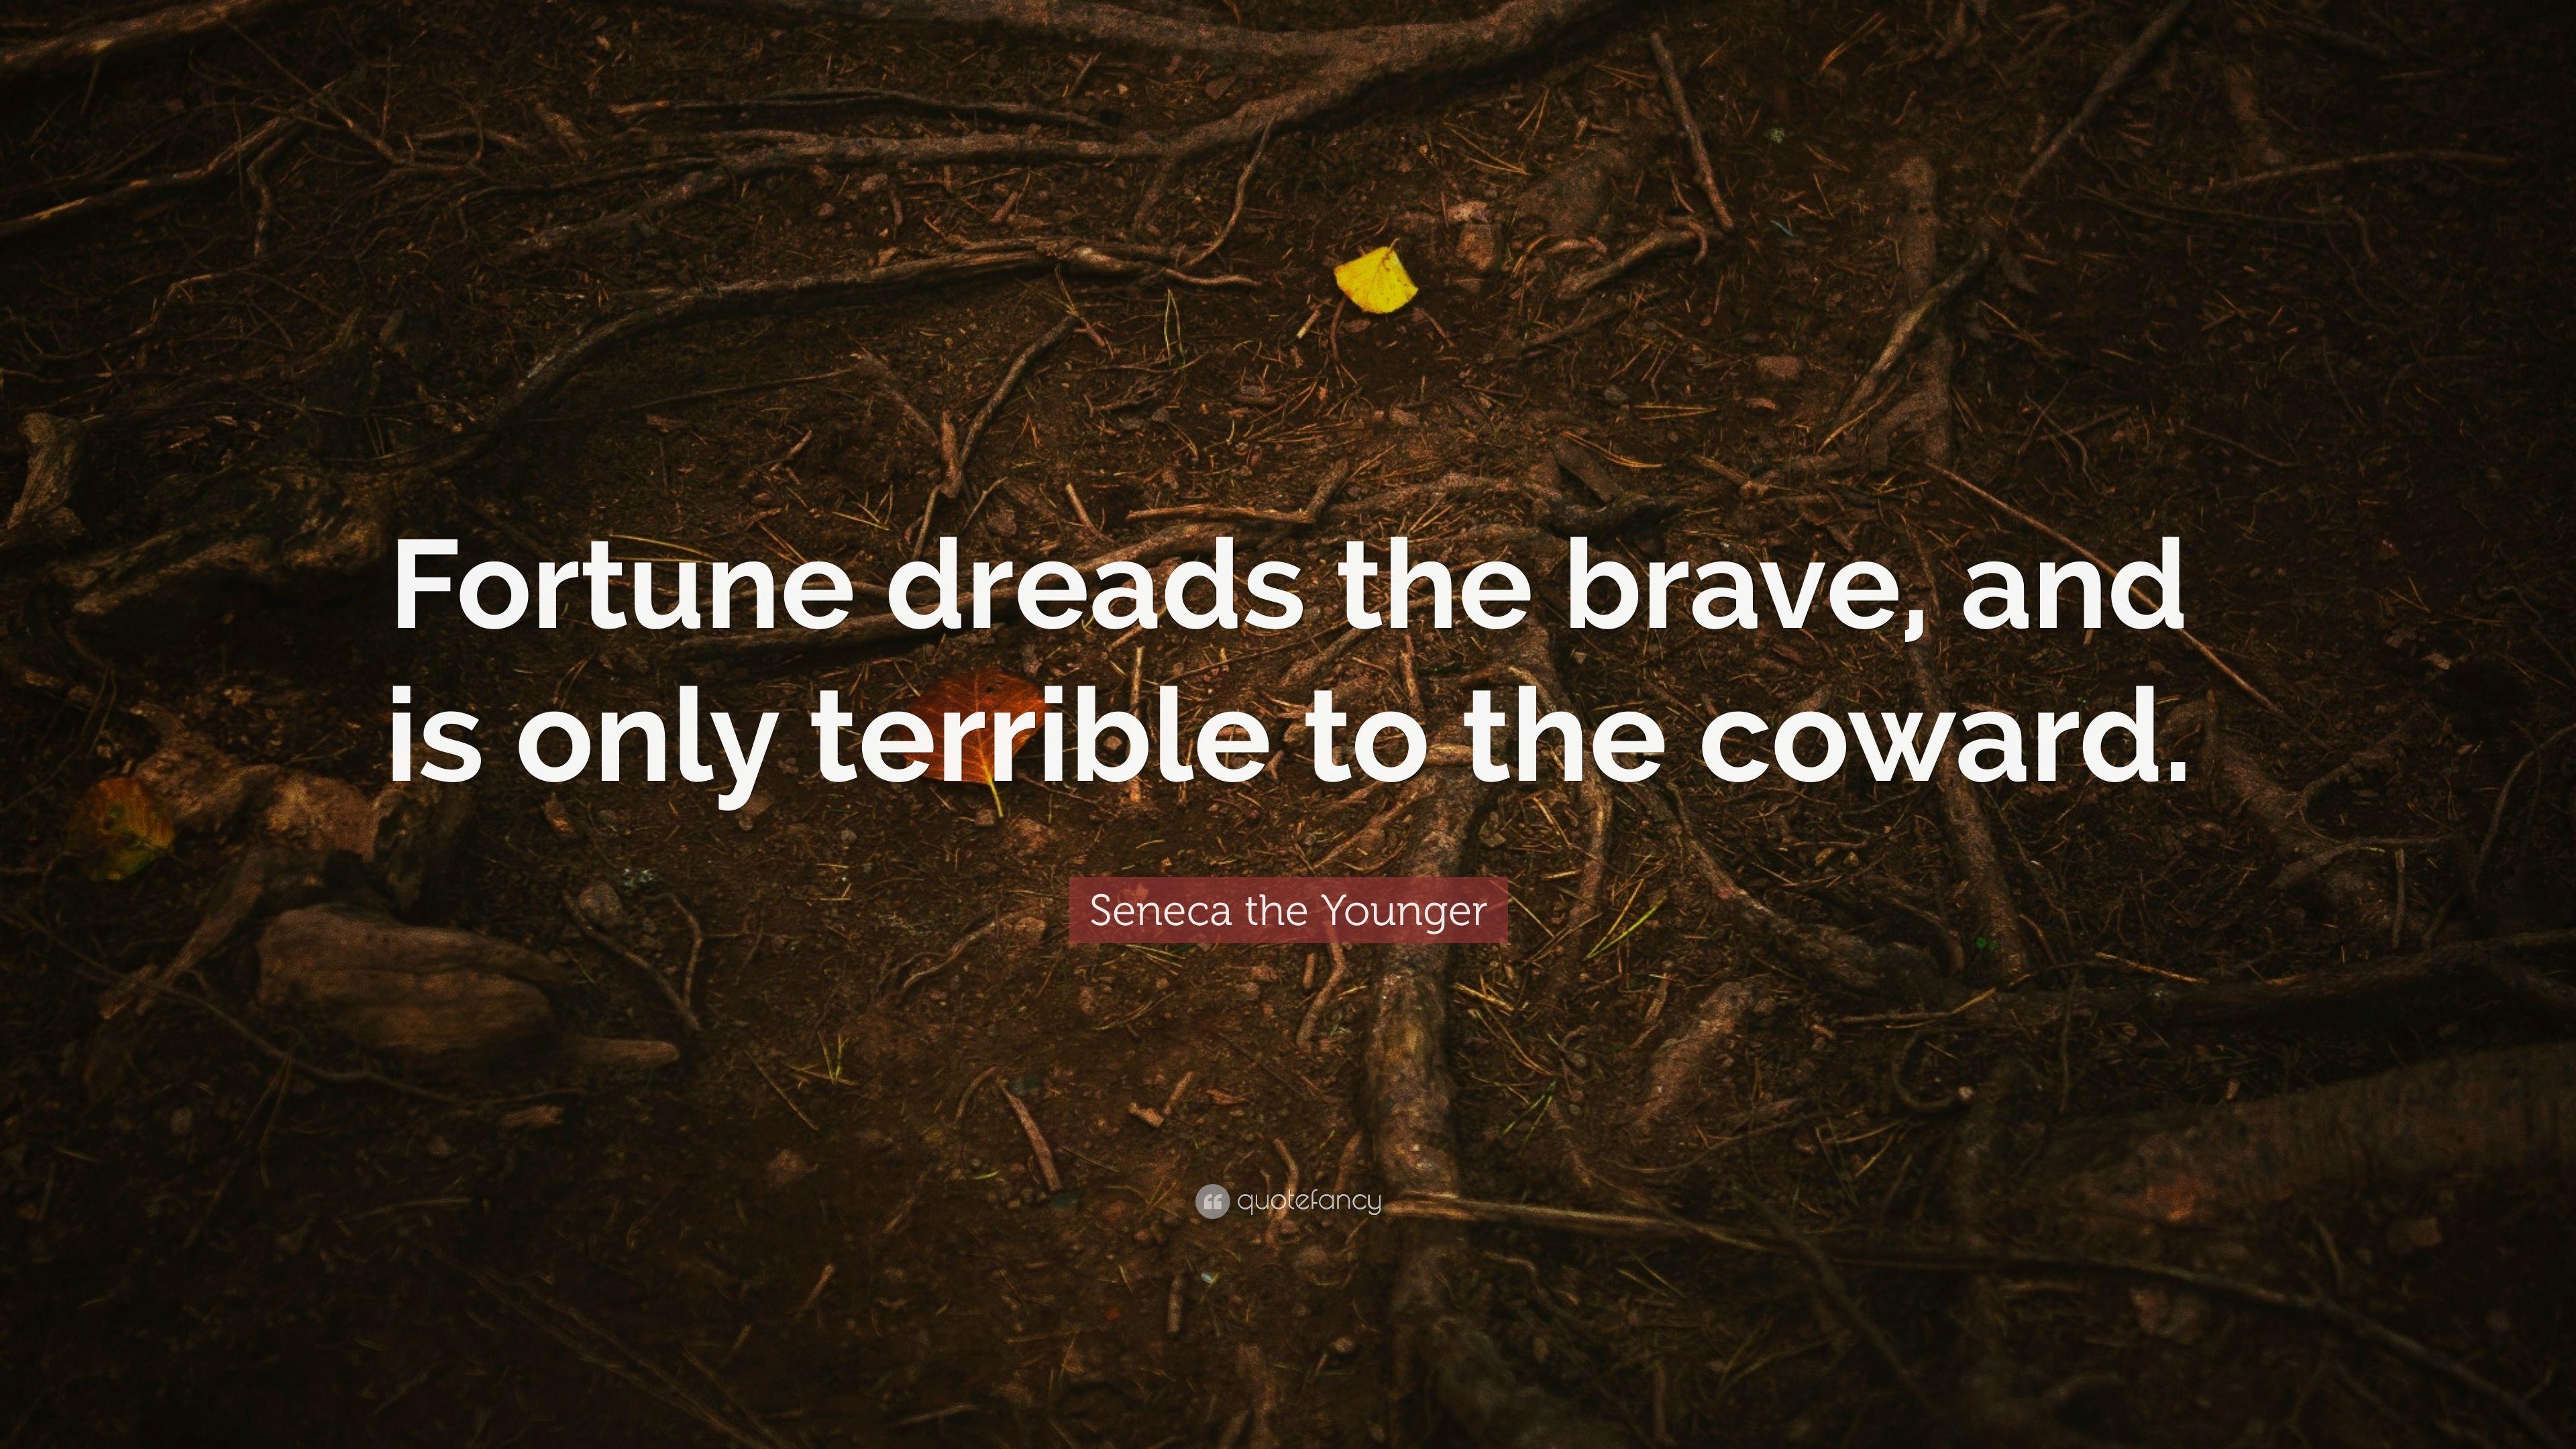 Seneca the Younger Quote: “Fortune dreads the brave, and is only